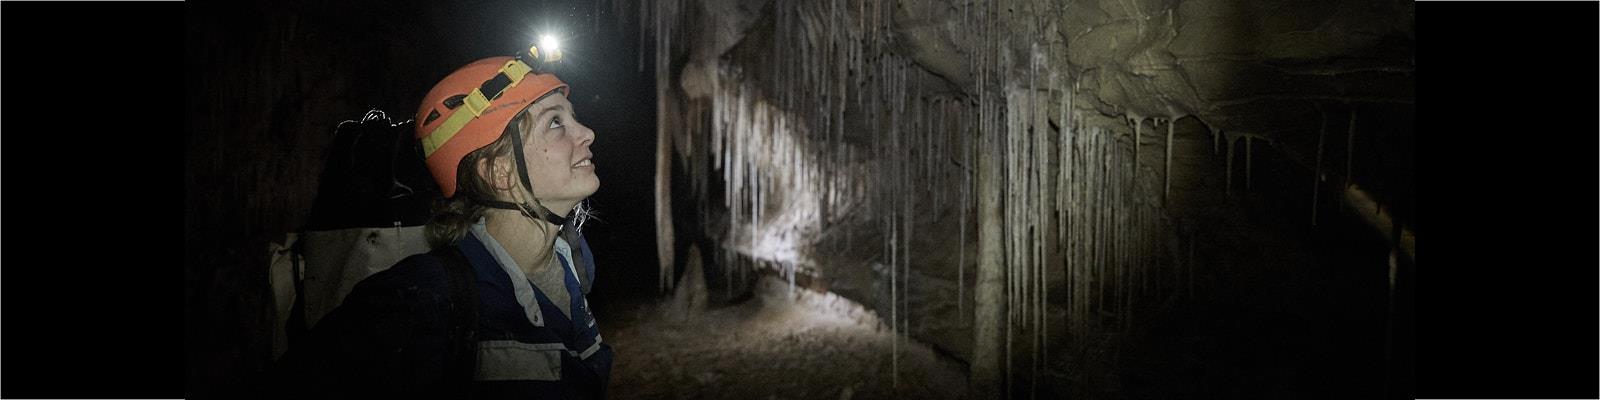 Student standing in cave wearing headlamp